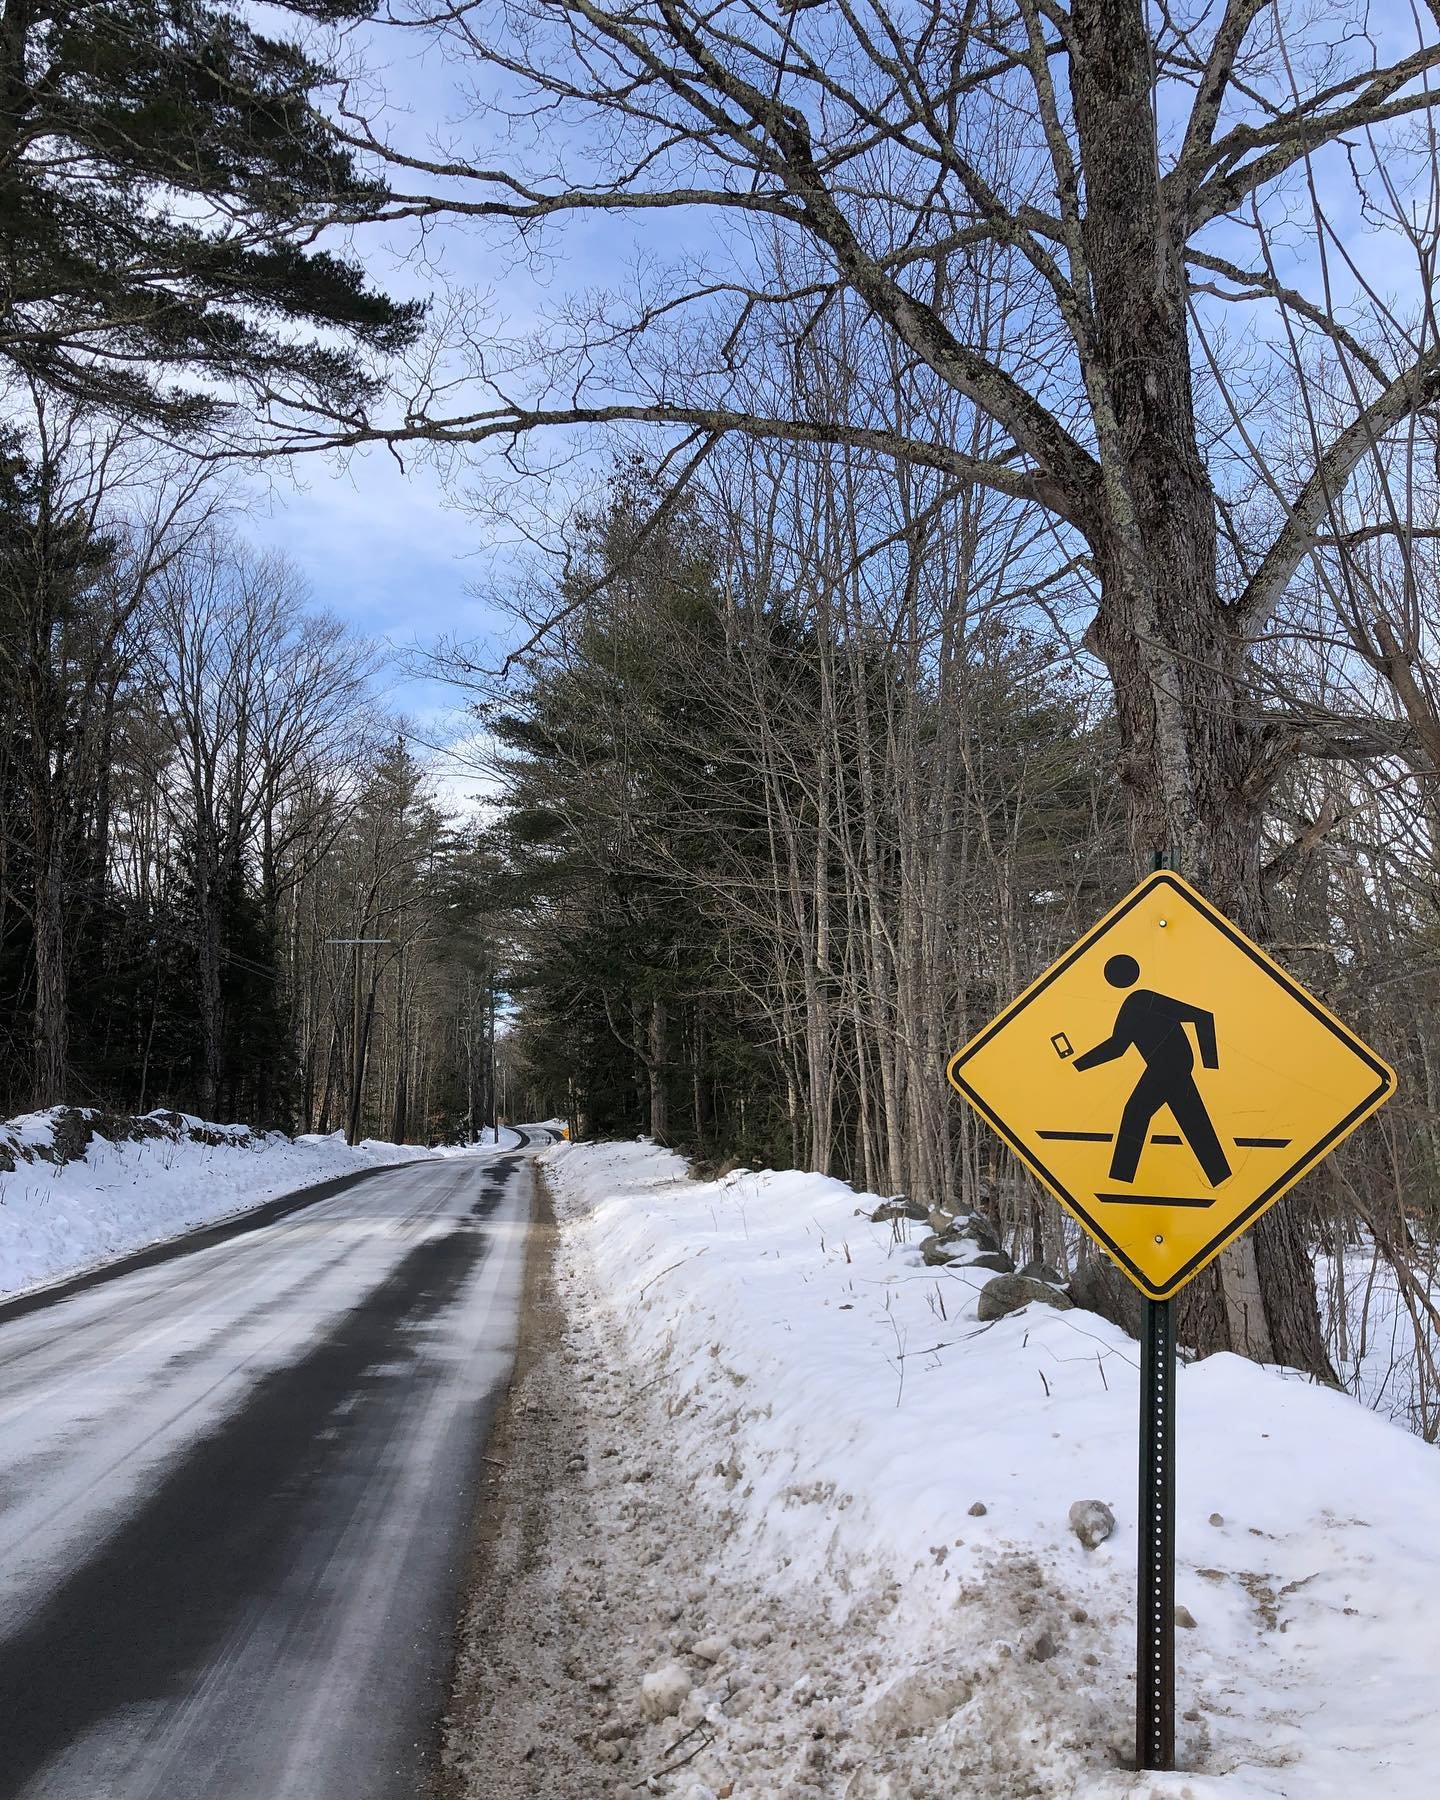 CAUTION: There are people walking through snow covered roads in NH and they&rsquo;re looking at their phones instead of the trees. #cautioncellphones 📱👀⚠️